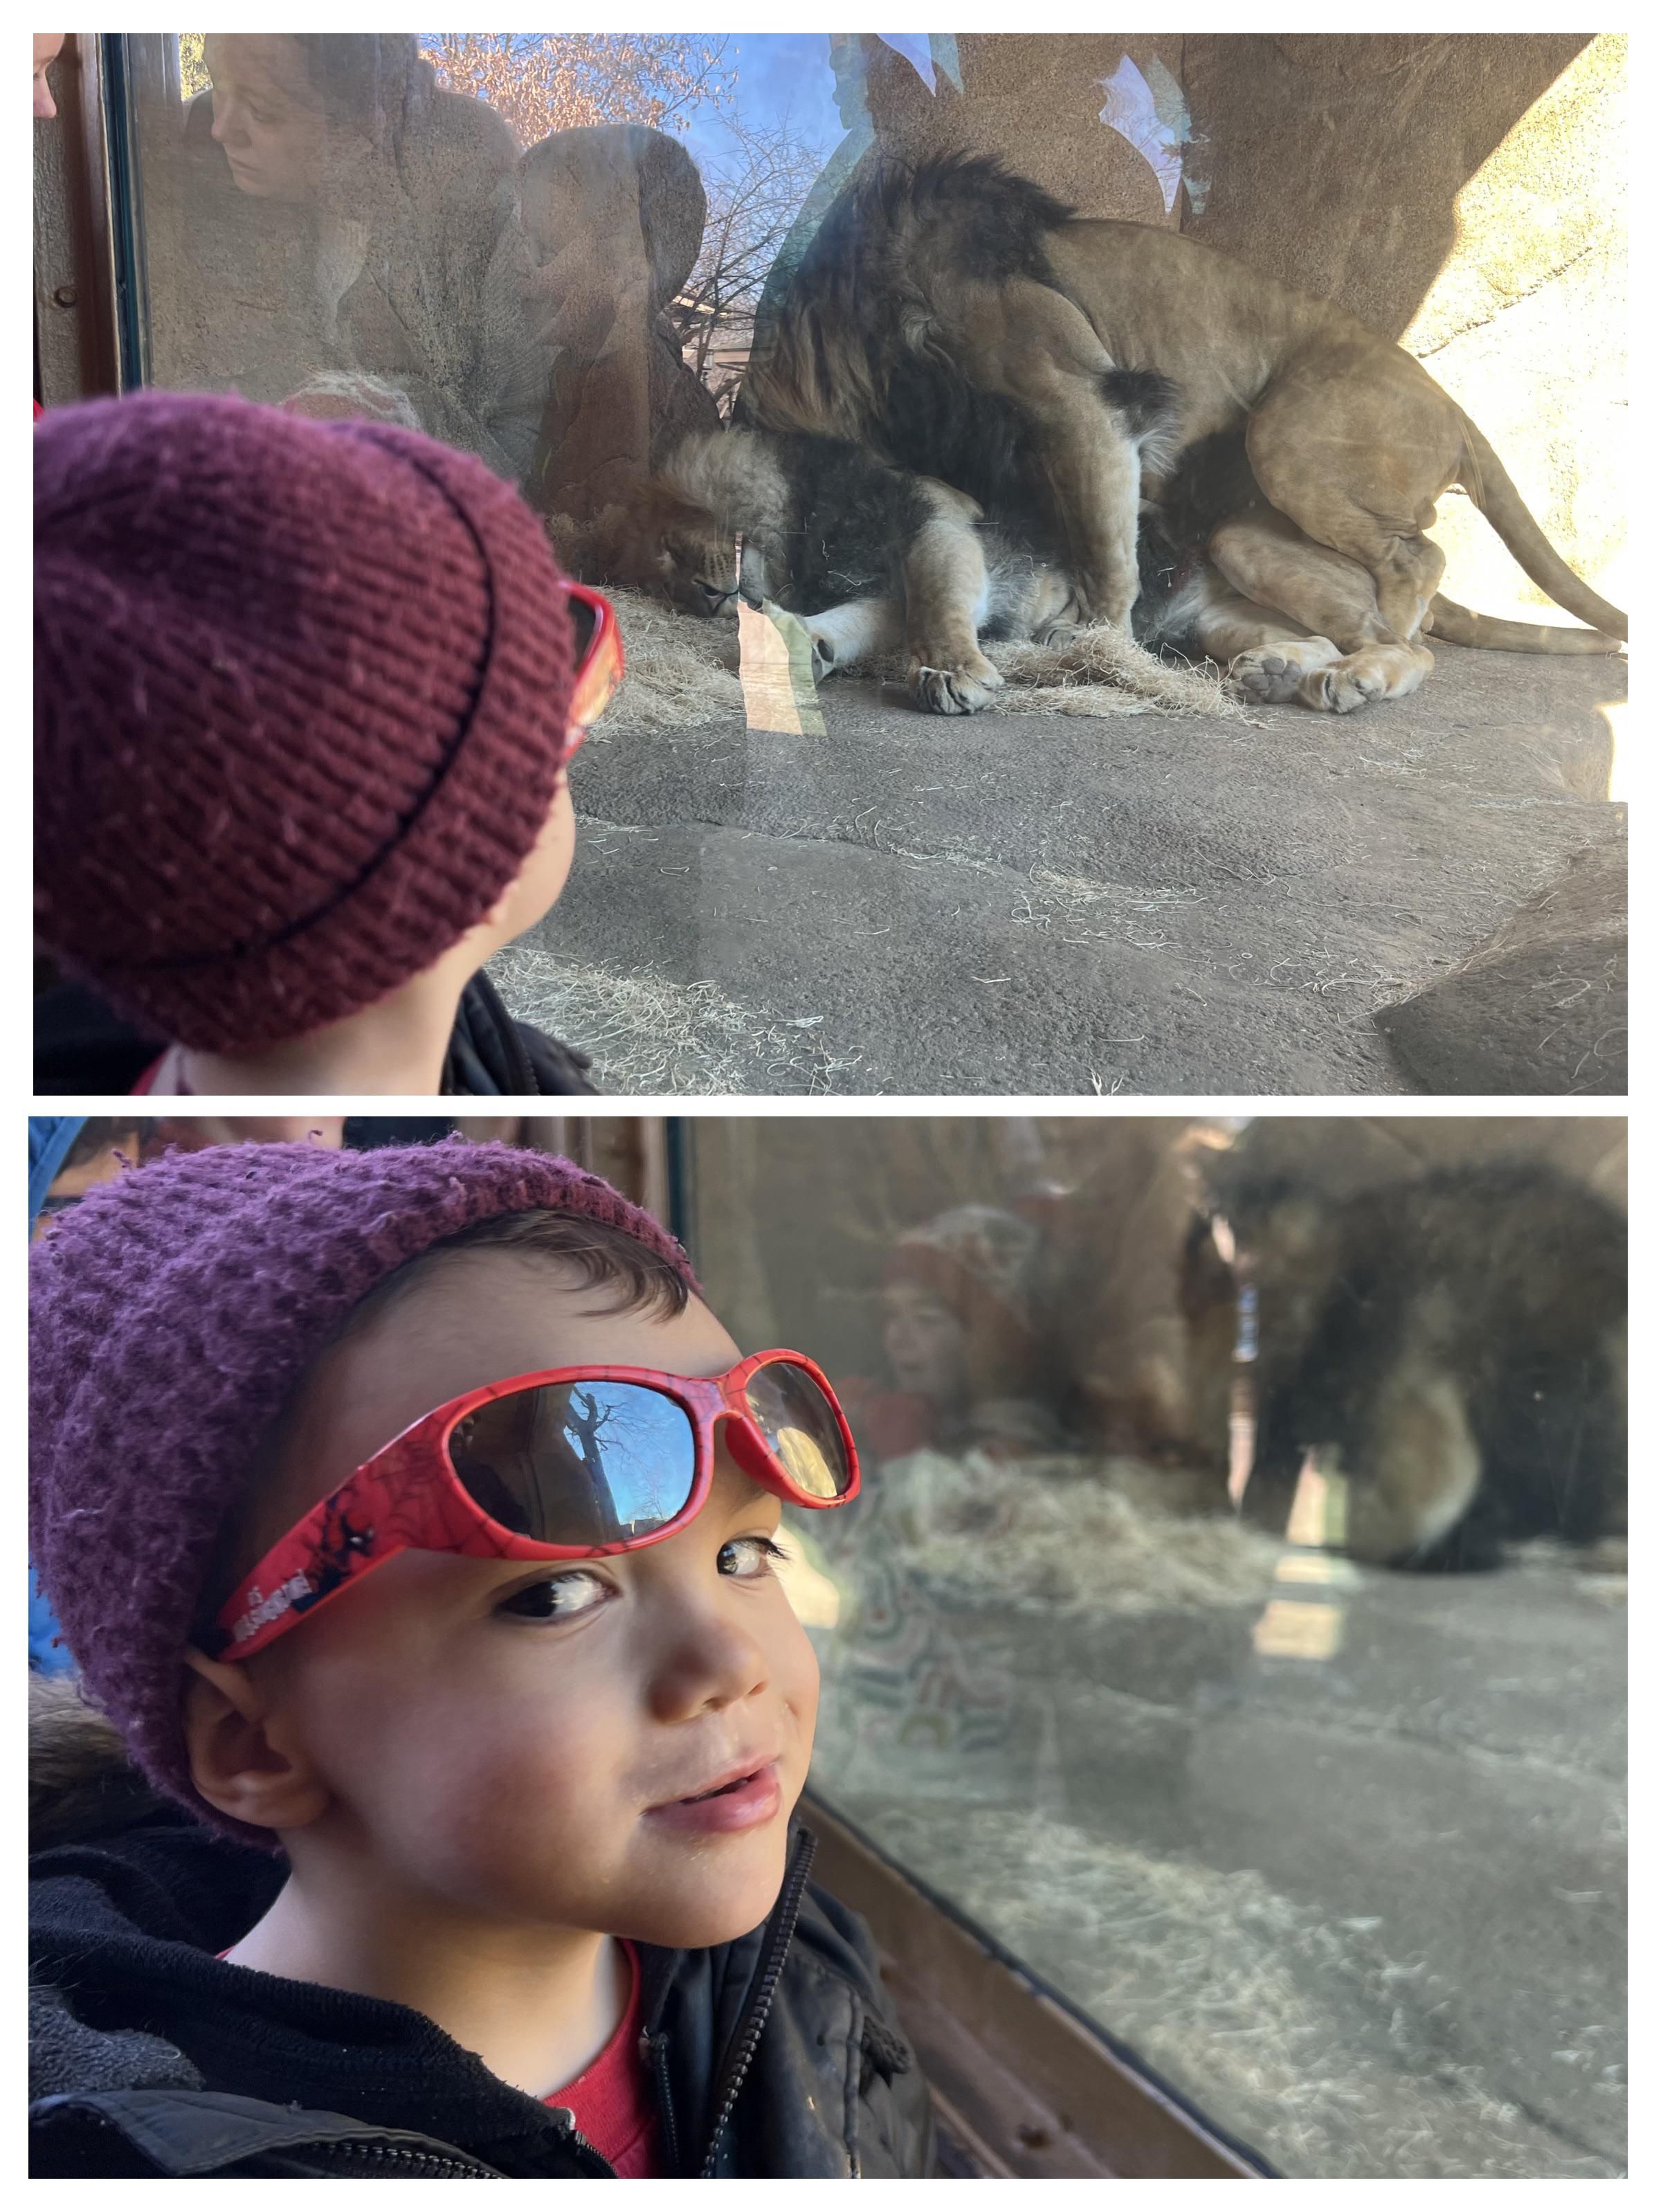 My kid had an educational day at the zoo.